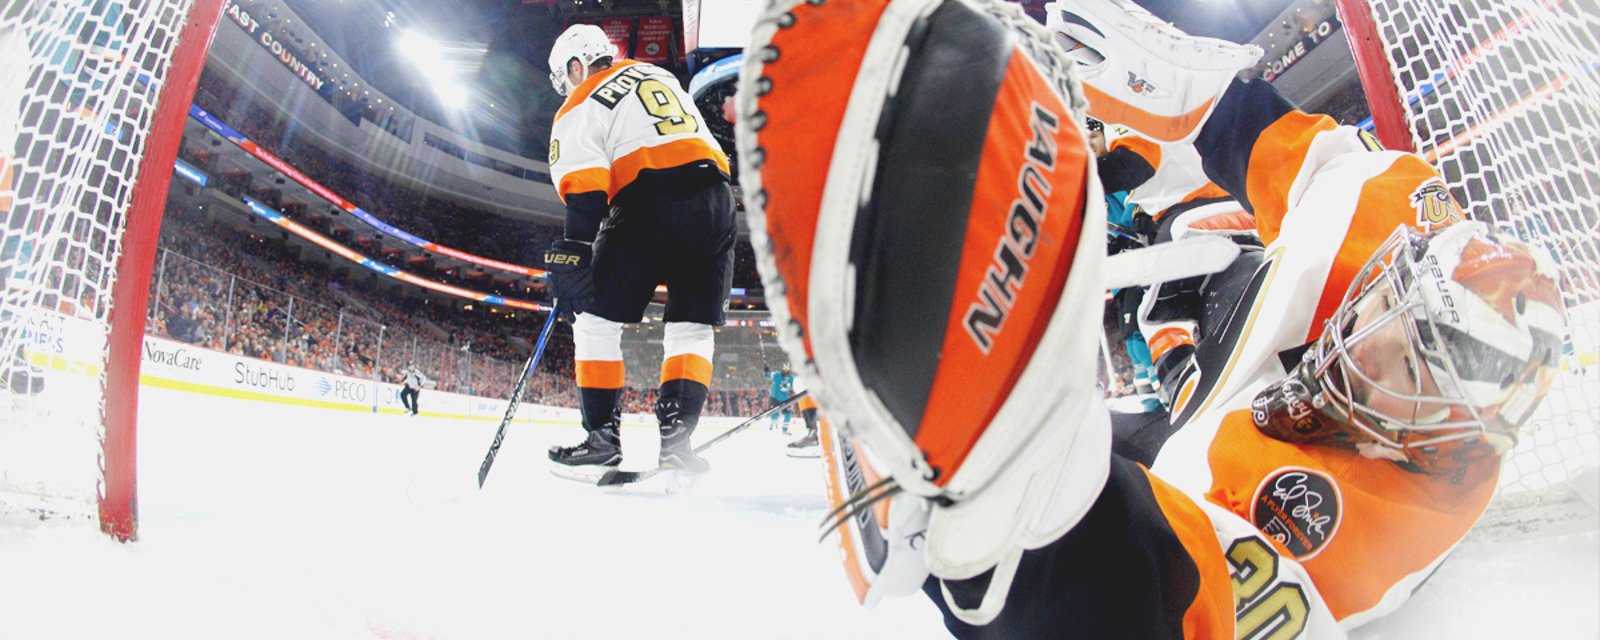 BREAKING: The Philadelphia Flyers proceeded to a roster movement today.